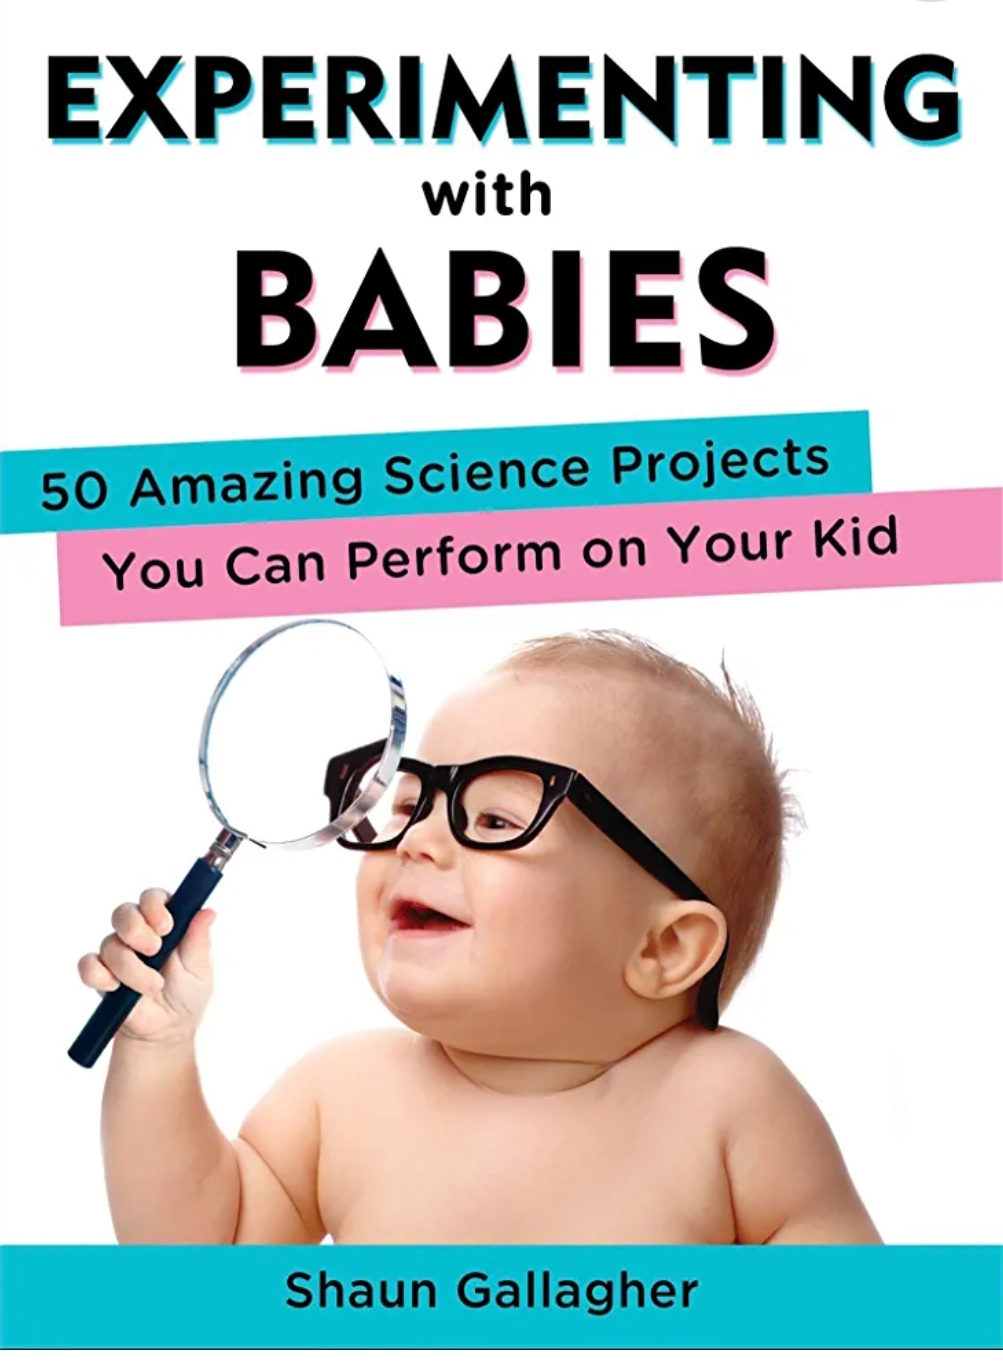 shaun gallagher experimenting with babies 50 amazing science projects you can perform on your kid christmas gift for a girl who is new mom